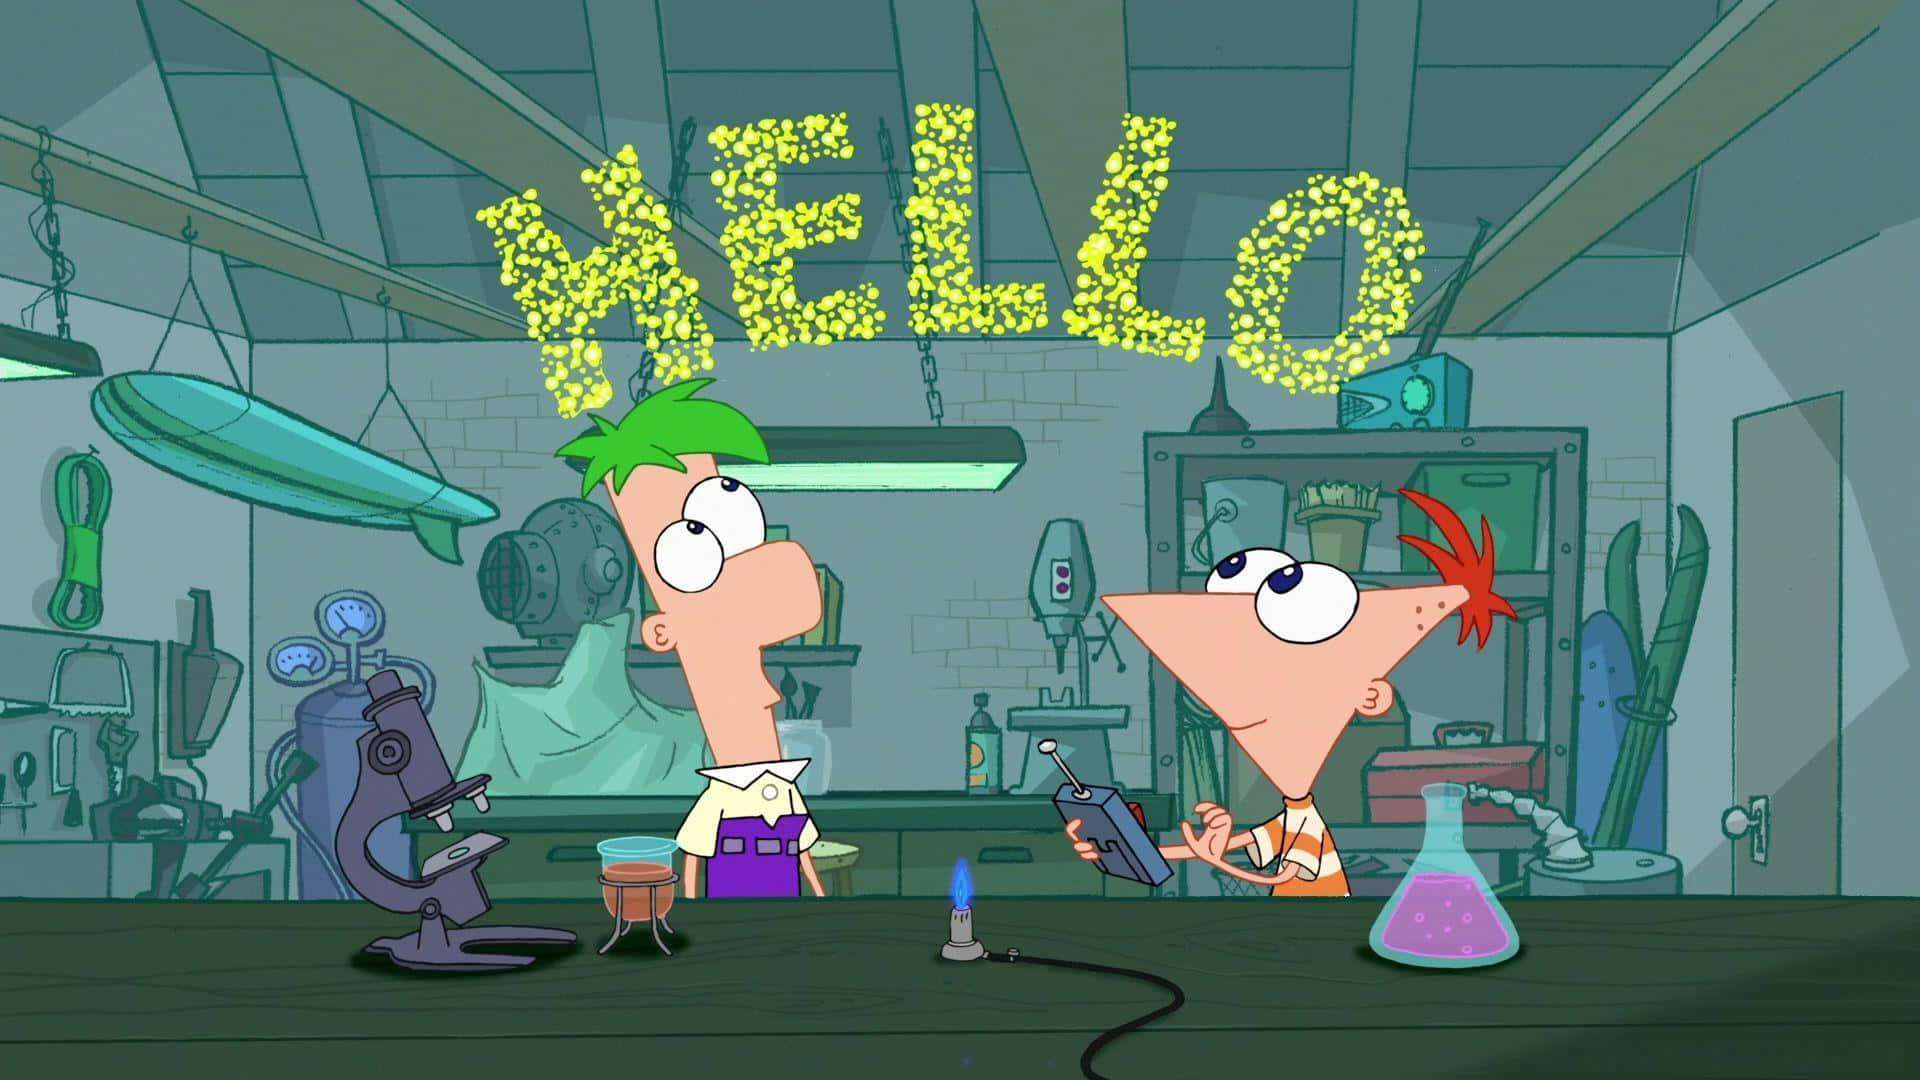 Phineas and Ferb Enjoying a Fun Adventure Together